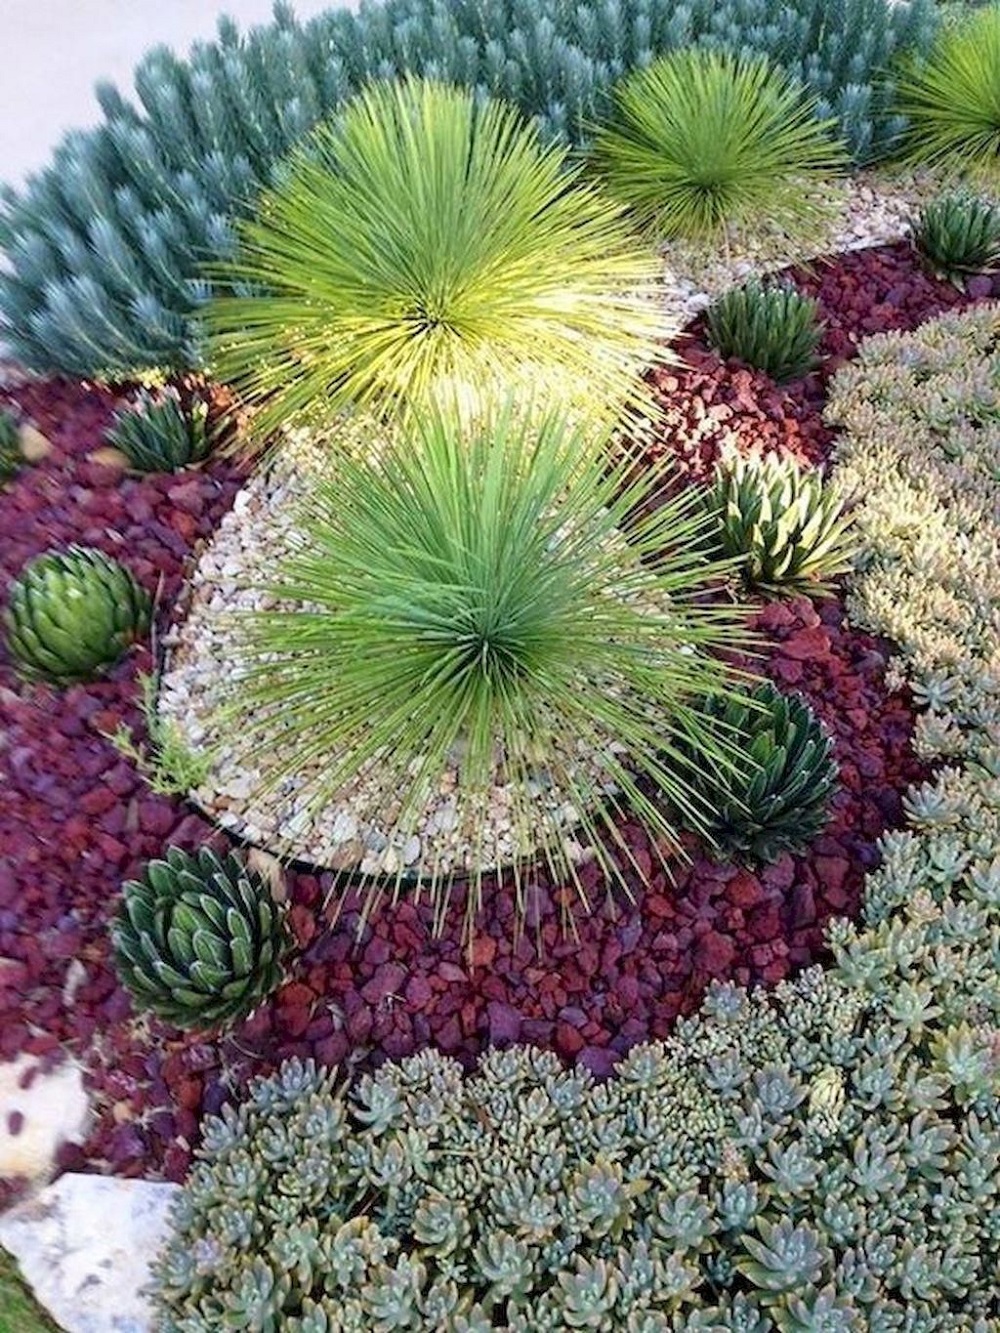 t1-2 Amazing cactus garden ideas you could try for your backyard